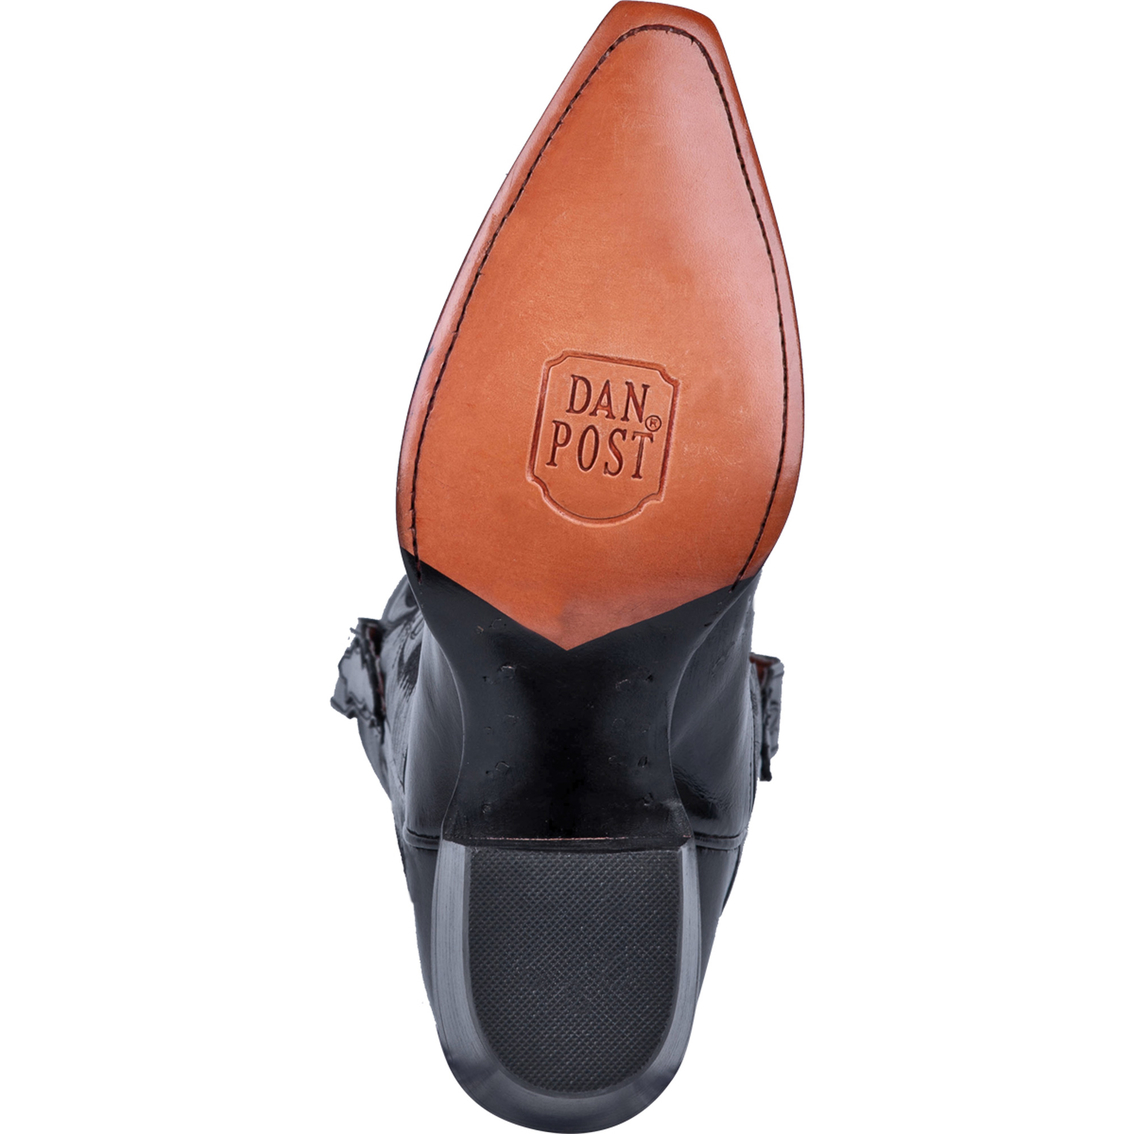 Dan Post 13 in. Leather Western Fashion Boot - Image 7 of 7